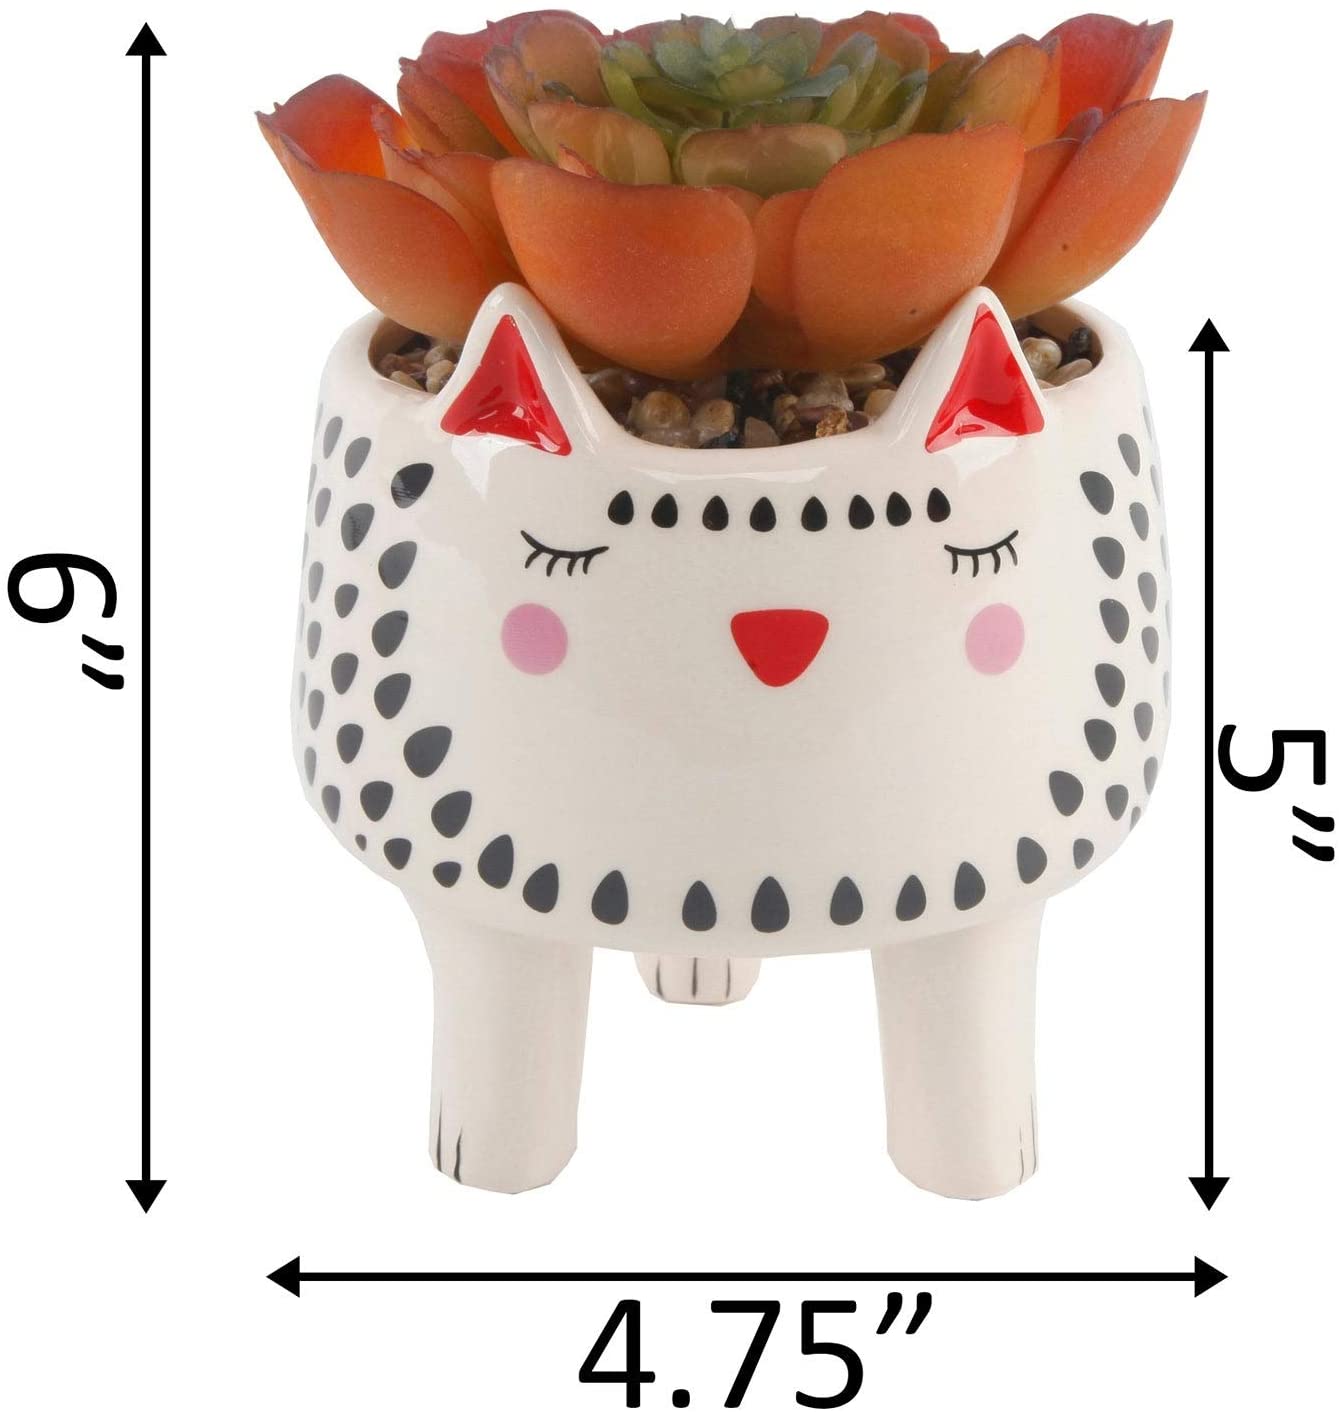 MISC Faux Succulent 4 75" Small White Cat Ceramic Planter One Size Handmade